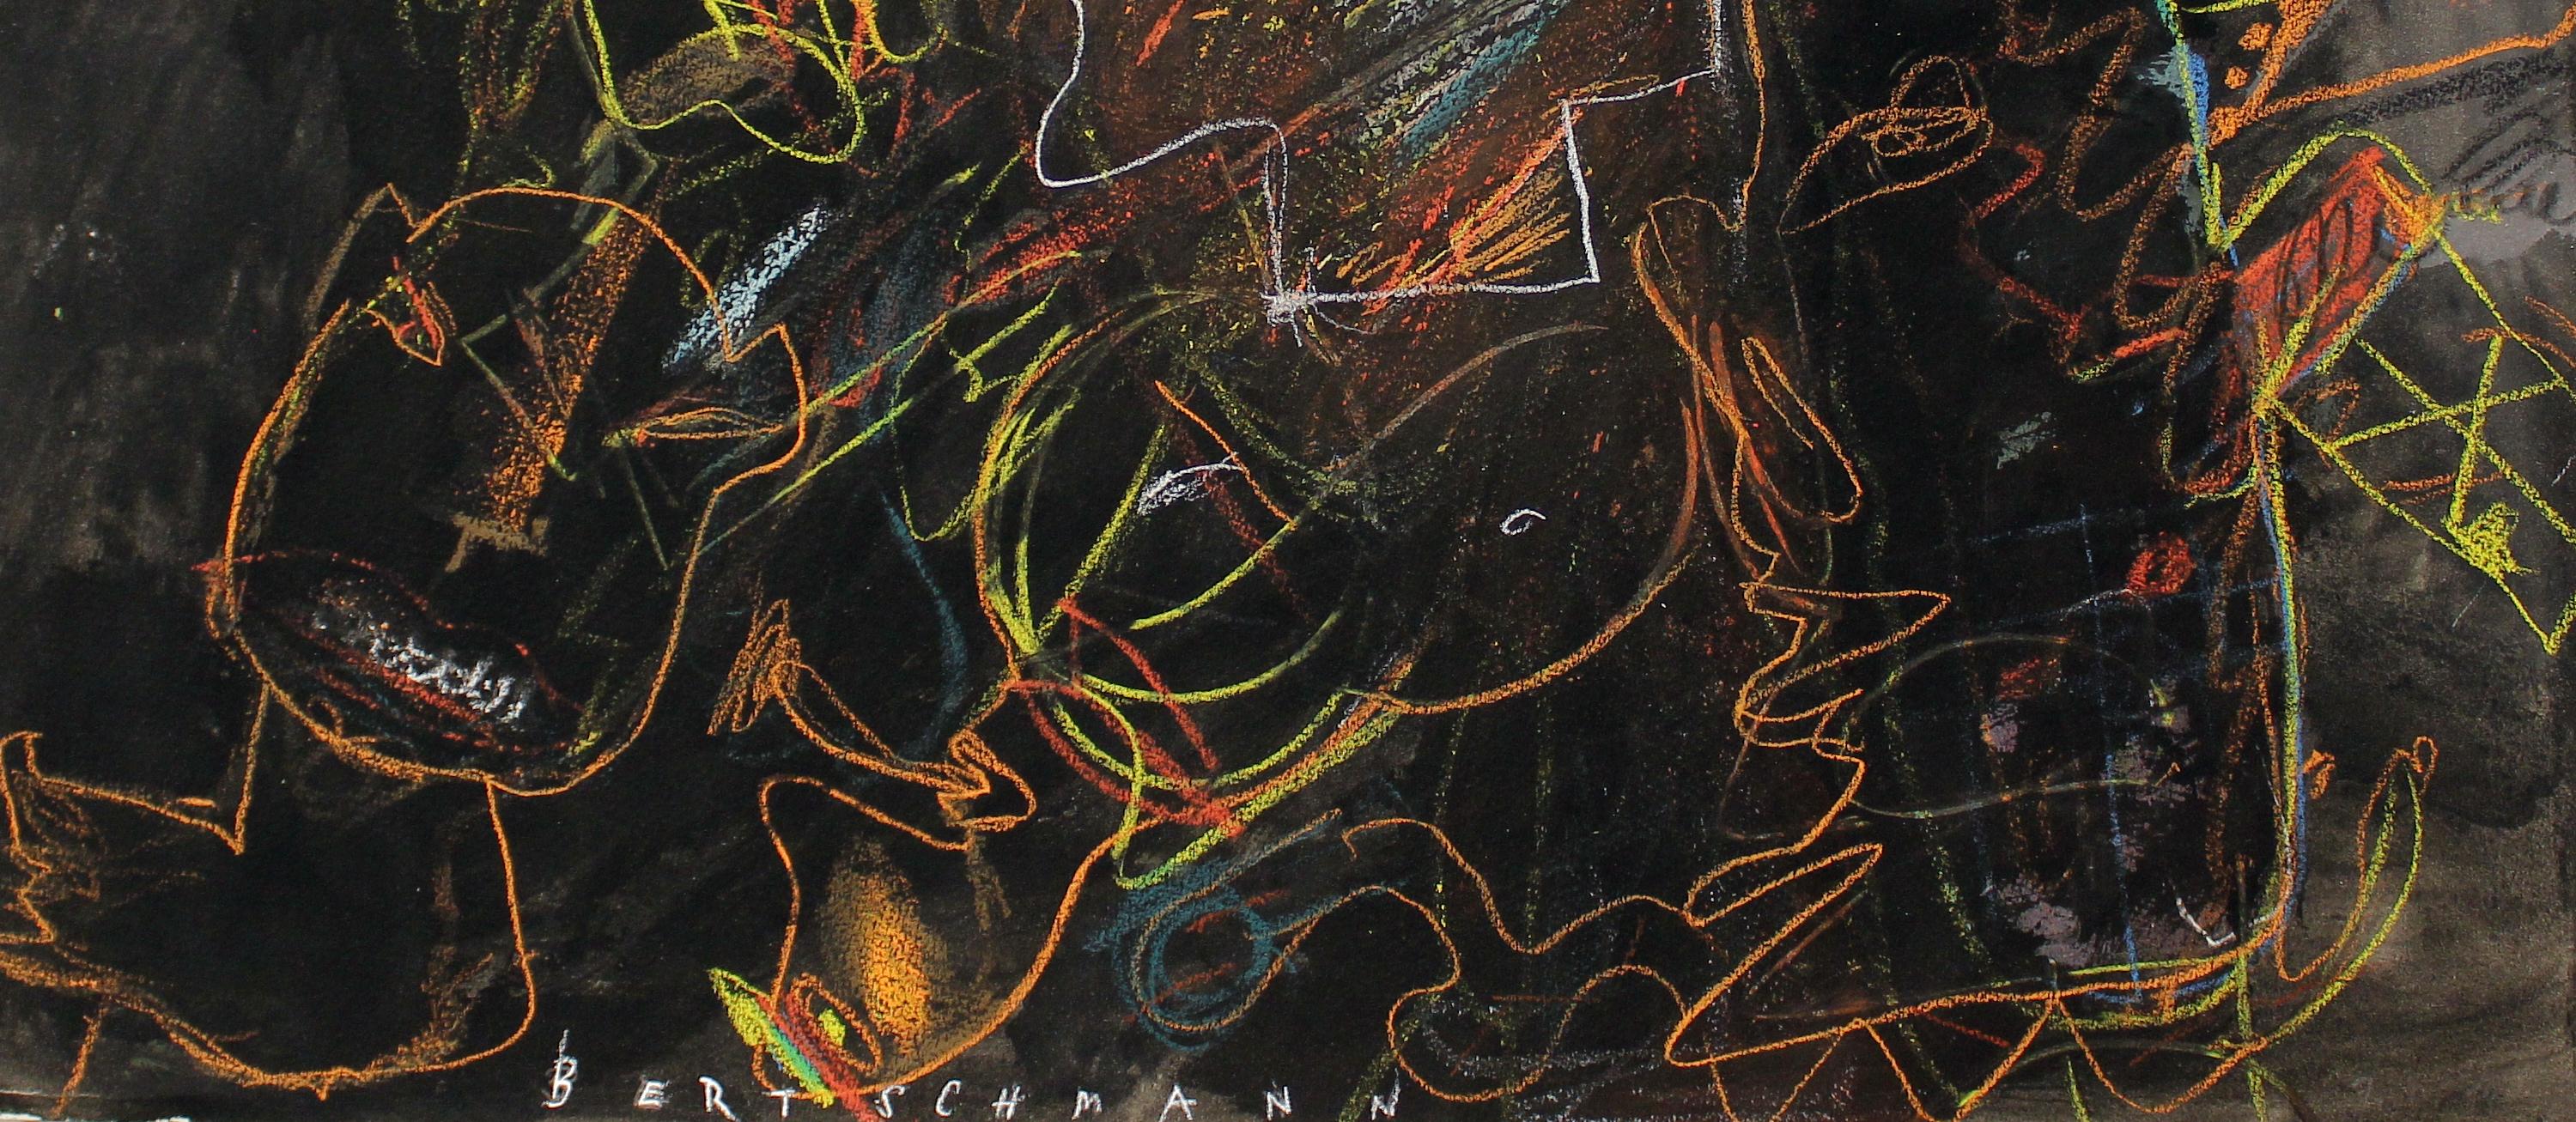 Figures on Black, from Subway series.  - Abstract Expressionist Painting by Harry Bertschmann